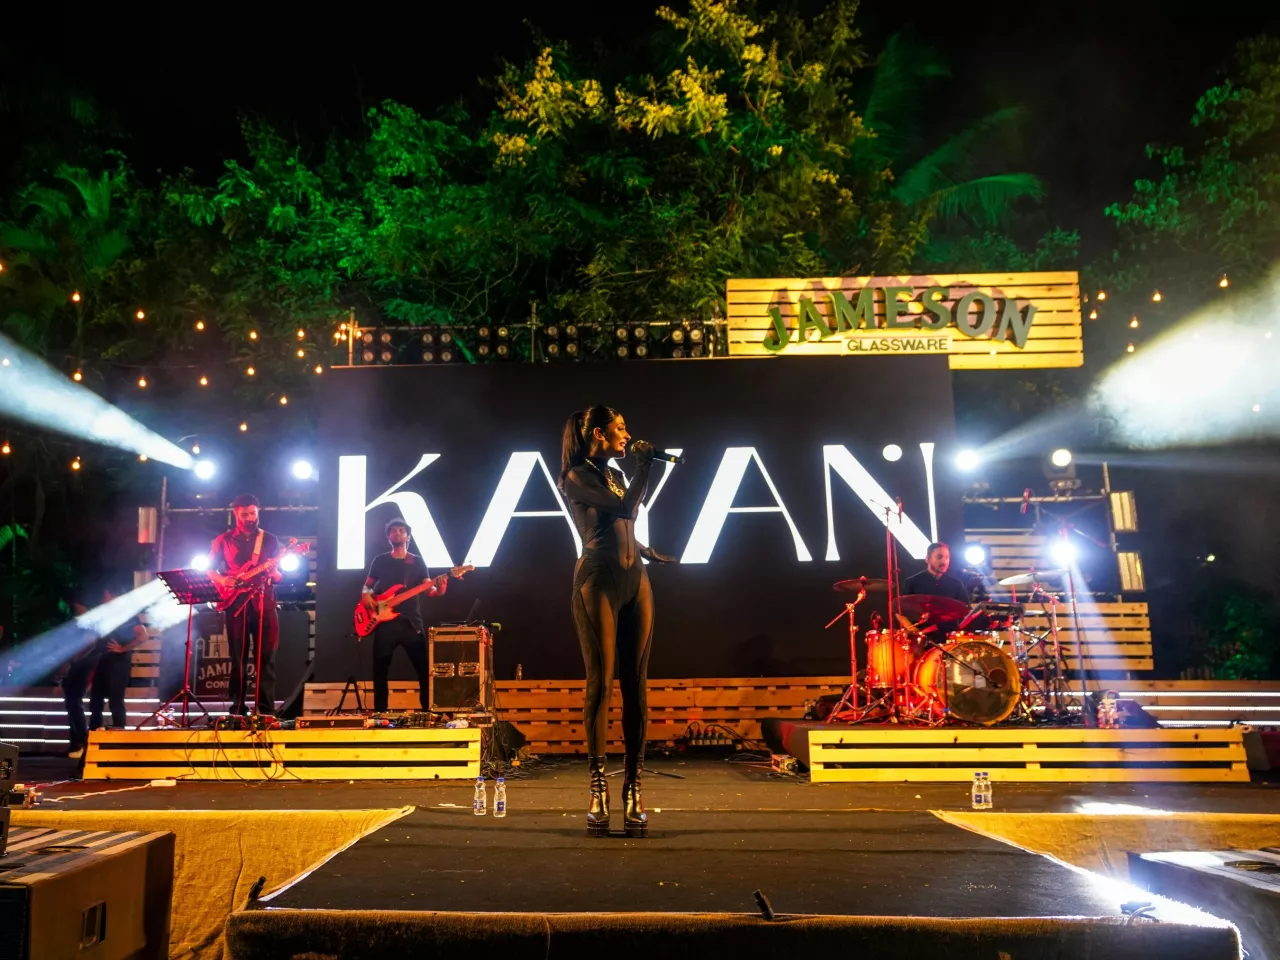 Jameson Connects - Kayan's performance enthralls the audience img#1